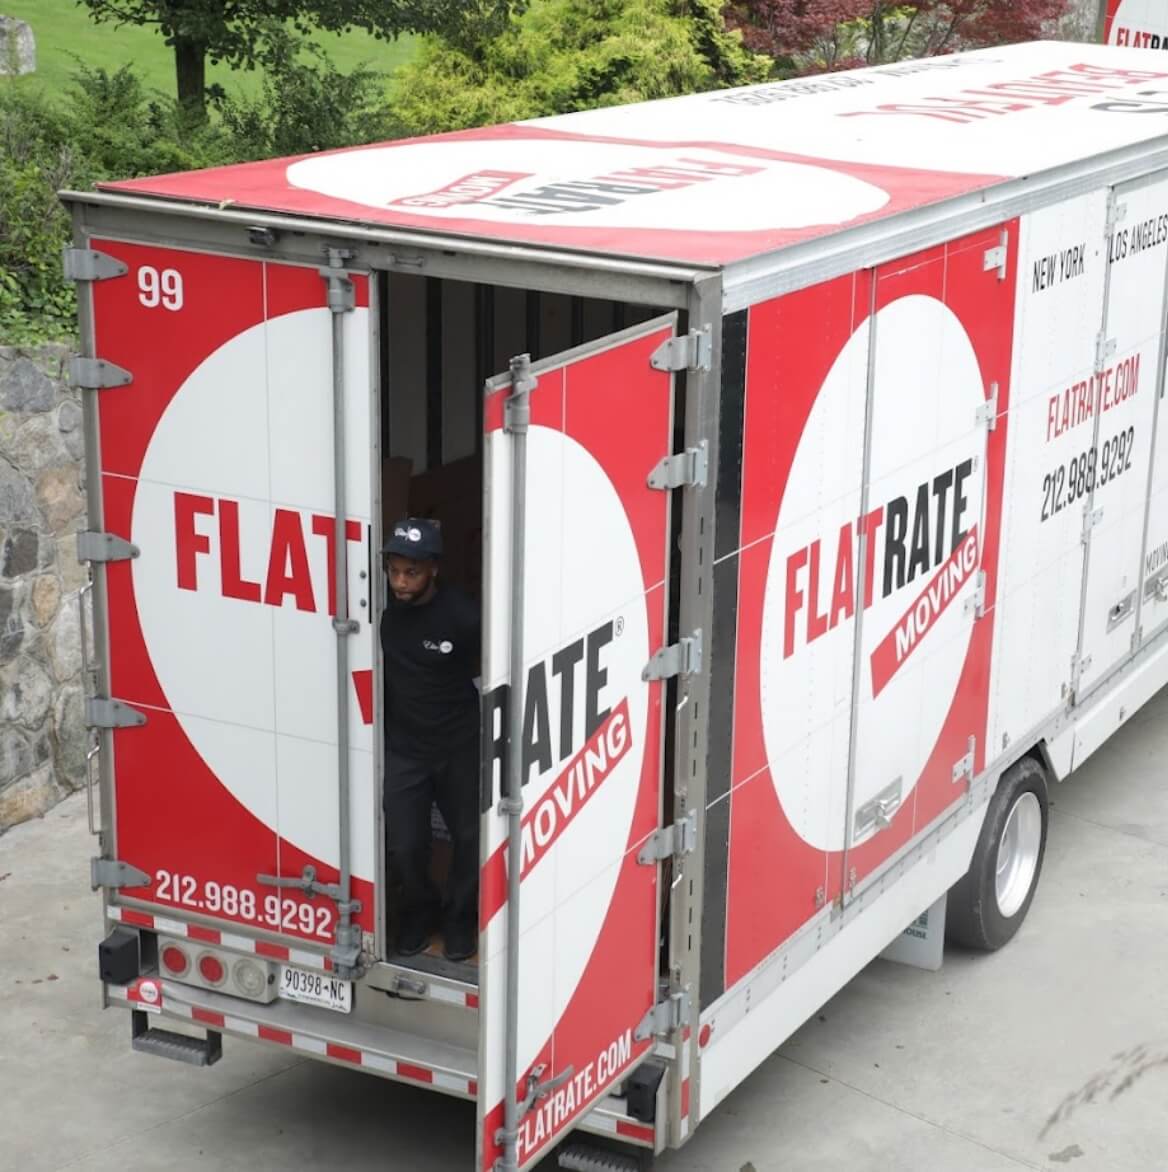 Flatrate delivery truck with rear door open, ready for art storage or transportation